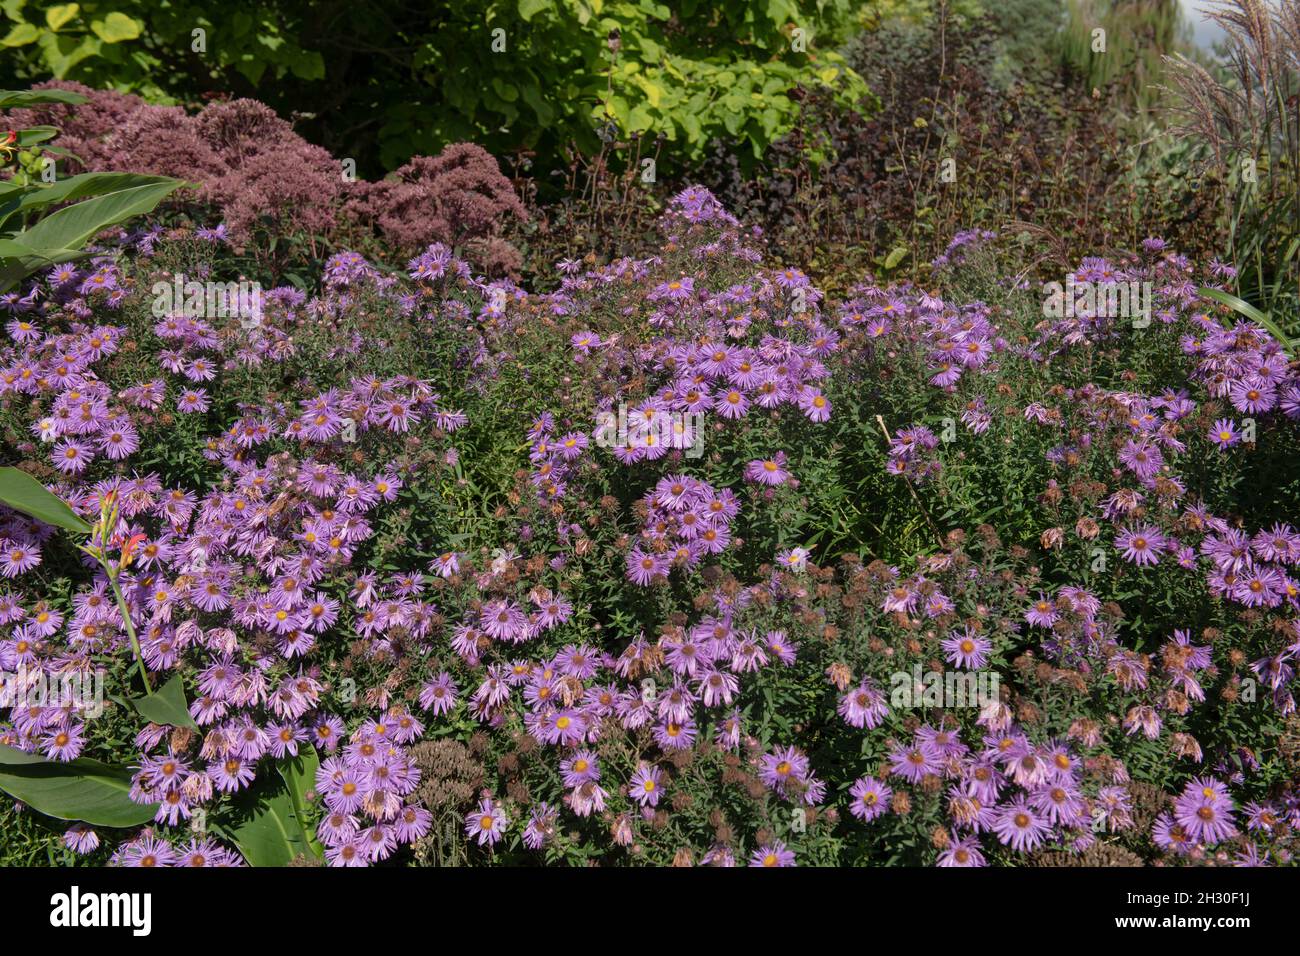 Autumn Flowering Bright Purple Flower Heads on a Michaelmas Daisy or New England Aster Plant (Symphyotrichum novae-angliae 'Mrs S.T. Wright) Stock Photo